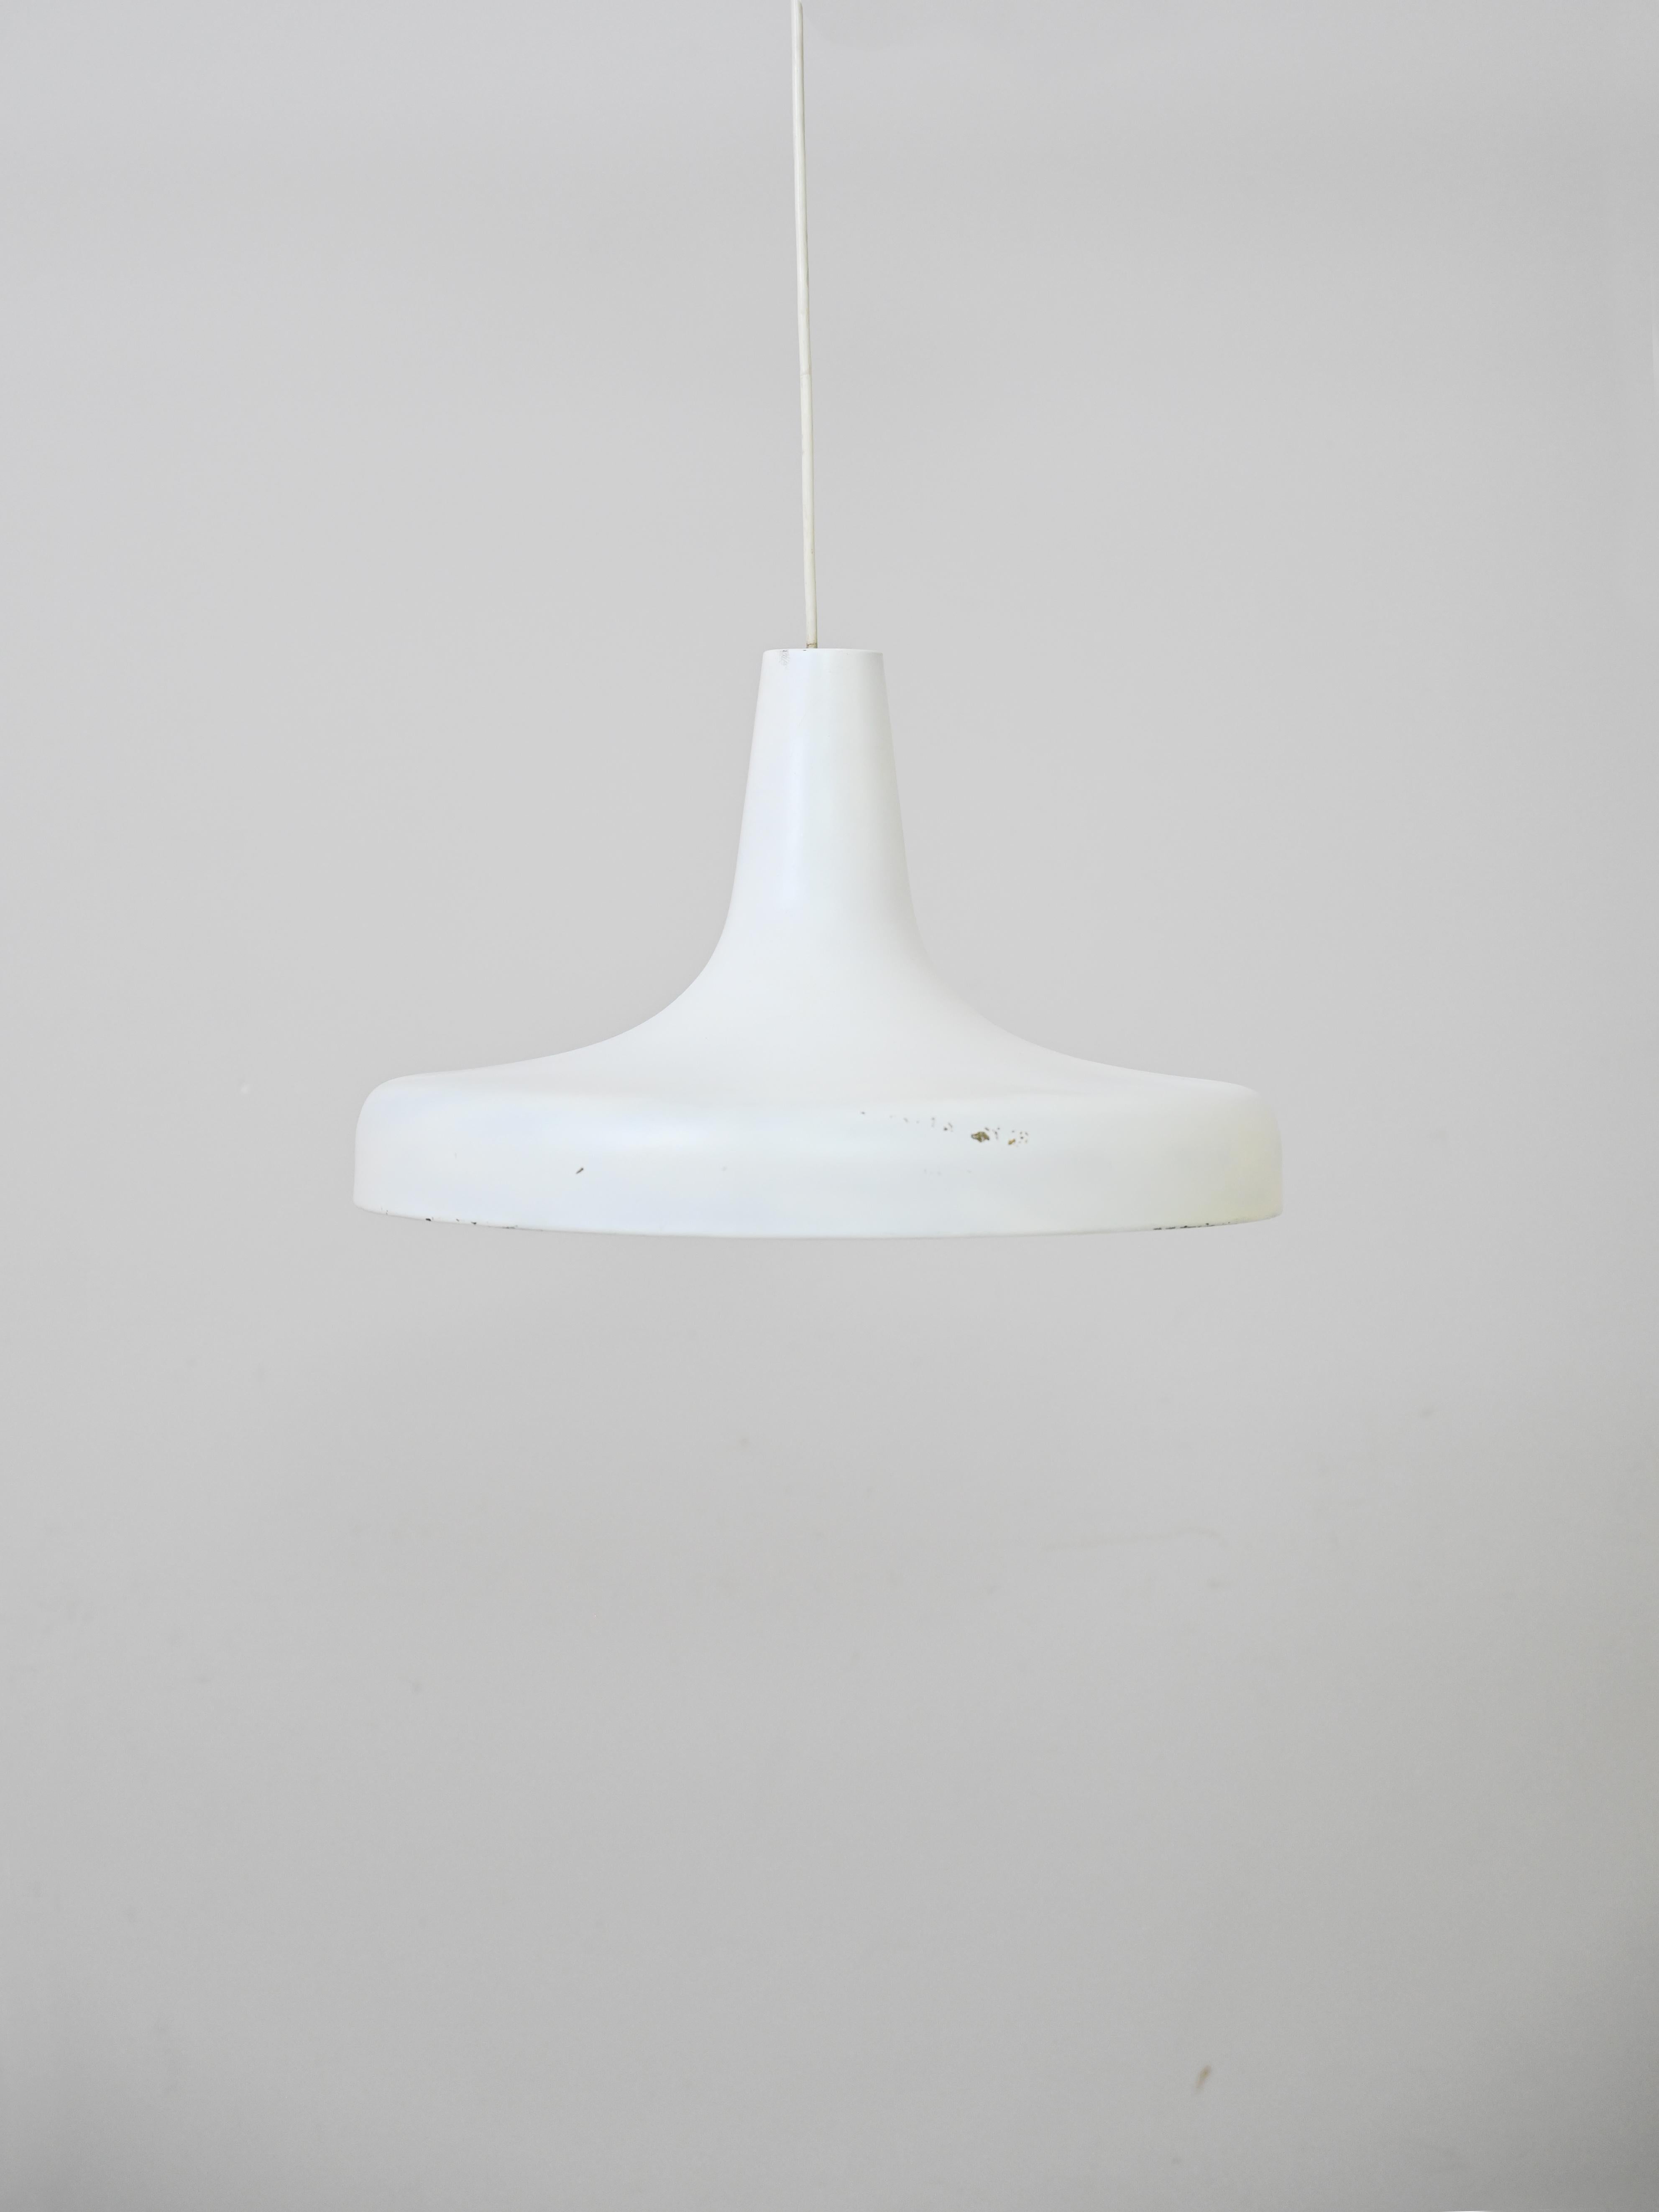 Vintage white metal lamp
This minimally designed lamp is traces the Nordic taste for simple lines and color
clear. A pendant fixture model that lends itself to many uses, but is most suitable for
illuminating a table, such as in the dining room